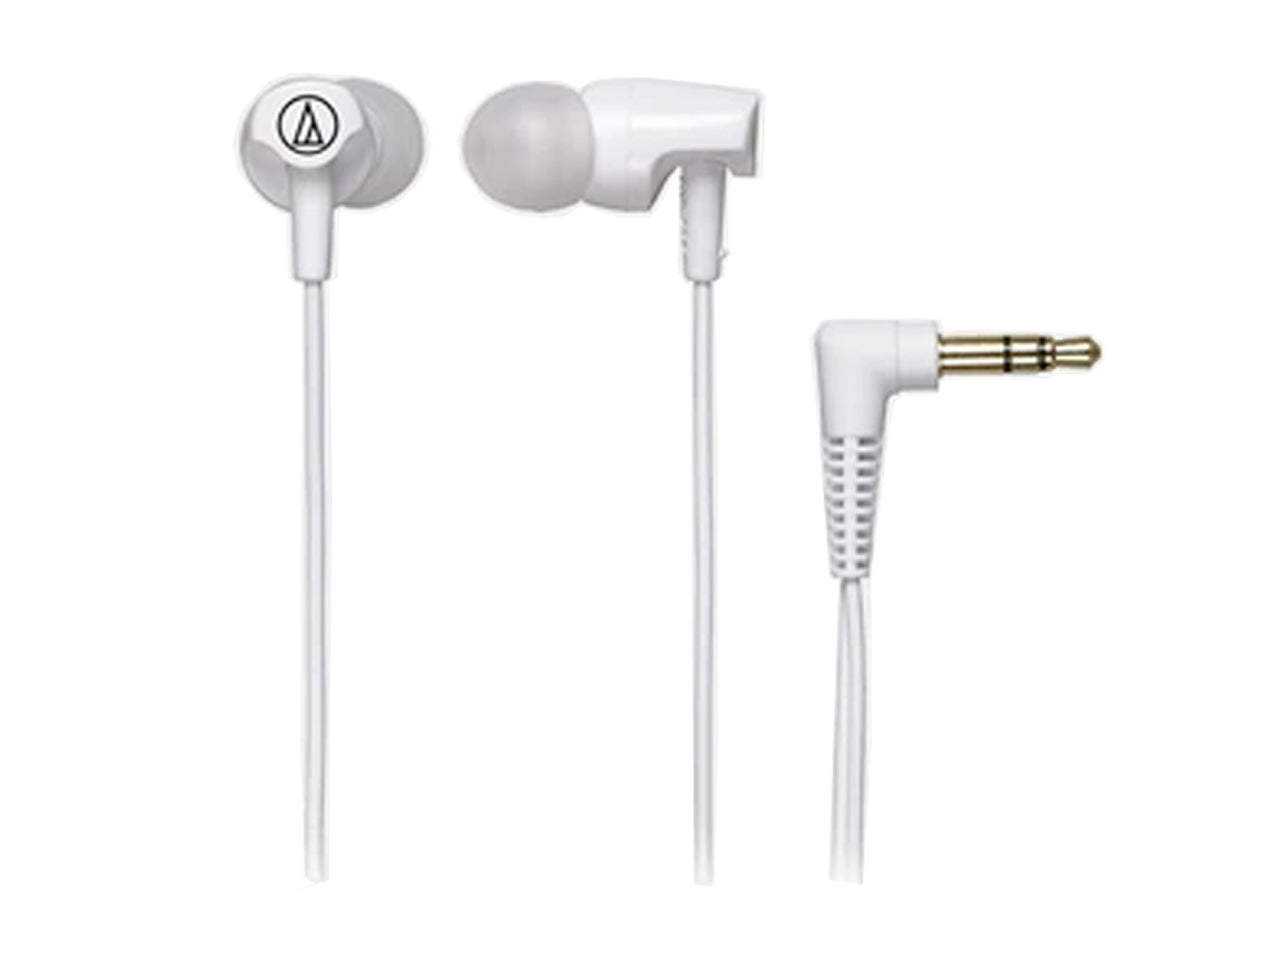 AUDIO-TECHNICA IN-EAR HEADPHONE WITH CORD WRAP (White)